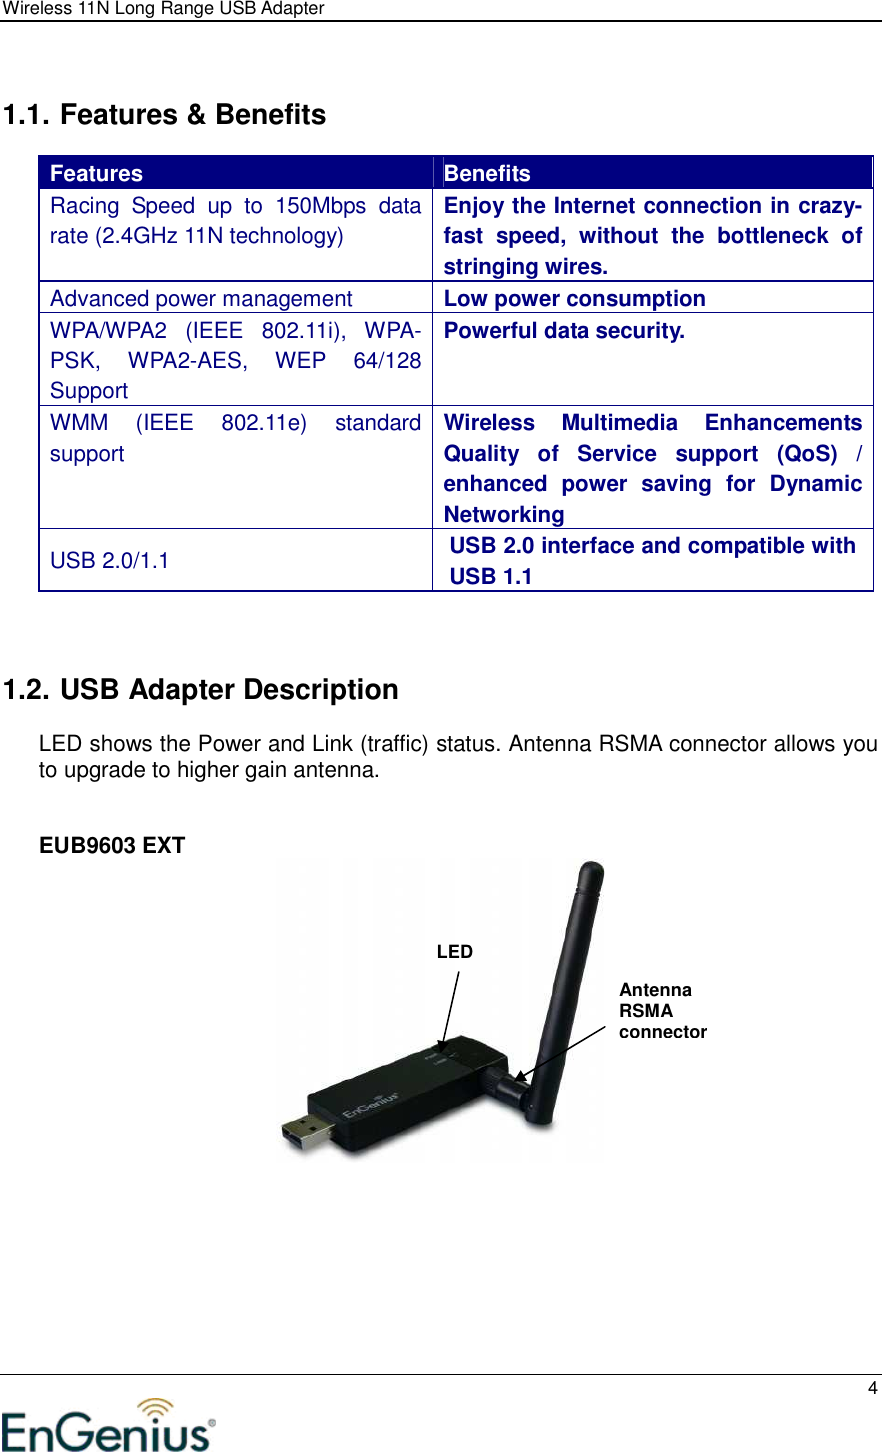 Wireless 11N Long Range USB Adapter  4   1.1. Features &amp; Benefits Features  Benefits Racing  Speed  up  to  150Mbps  data rate (2.4GHz 11N technology) Enjoy the Internet connection in crazy-fast  speed,  without  the  bottleneck  of stringing wires. Advanced power management  Low power consumption WPA/WPA2  (IEEE  802.11i),  WPA-PSK,  WPA2-AES,  WEP  64/128 Support Powerful data security. WMM  (IEEE  802.11e)  standard support  Wireless  Multimedia  Enhancements Quality  of  Service  support  (QoS)  / enhanced  power  saving  for  Dynamic Networking USB 2.0/1.1  USB 2.0 interface and compatible with USB 1.1    1.2. USB Adapter Description LED shows the Power and Link (traffic) status. Antenna RSMA connector allows you to upgrade to higher gain antenna.    EUB9603 EXT          LED Antenna RSMA connector 